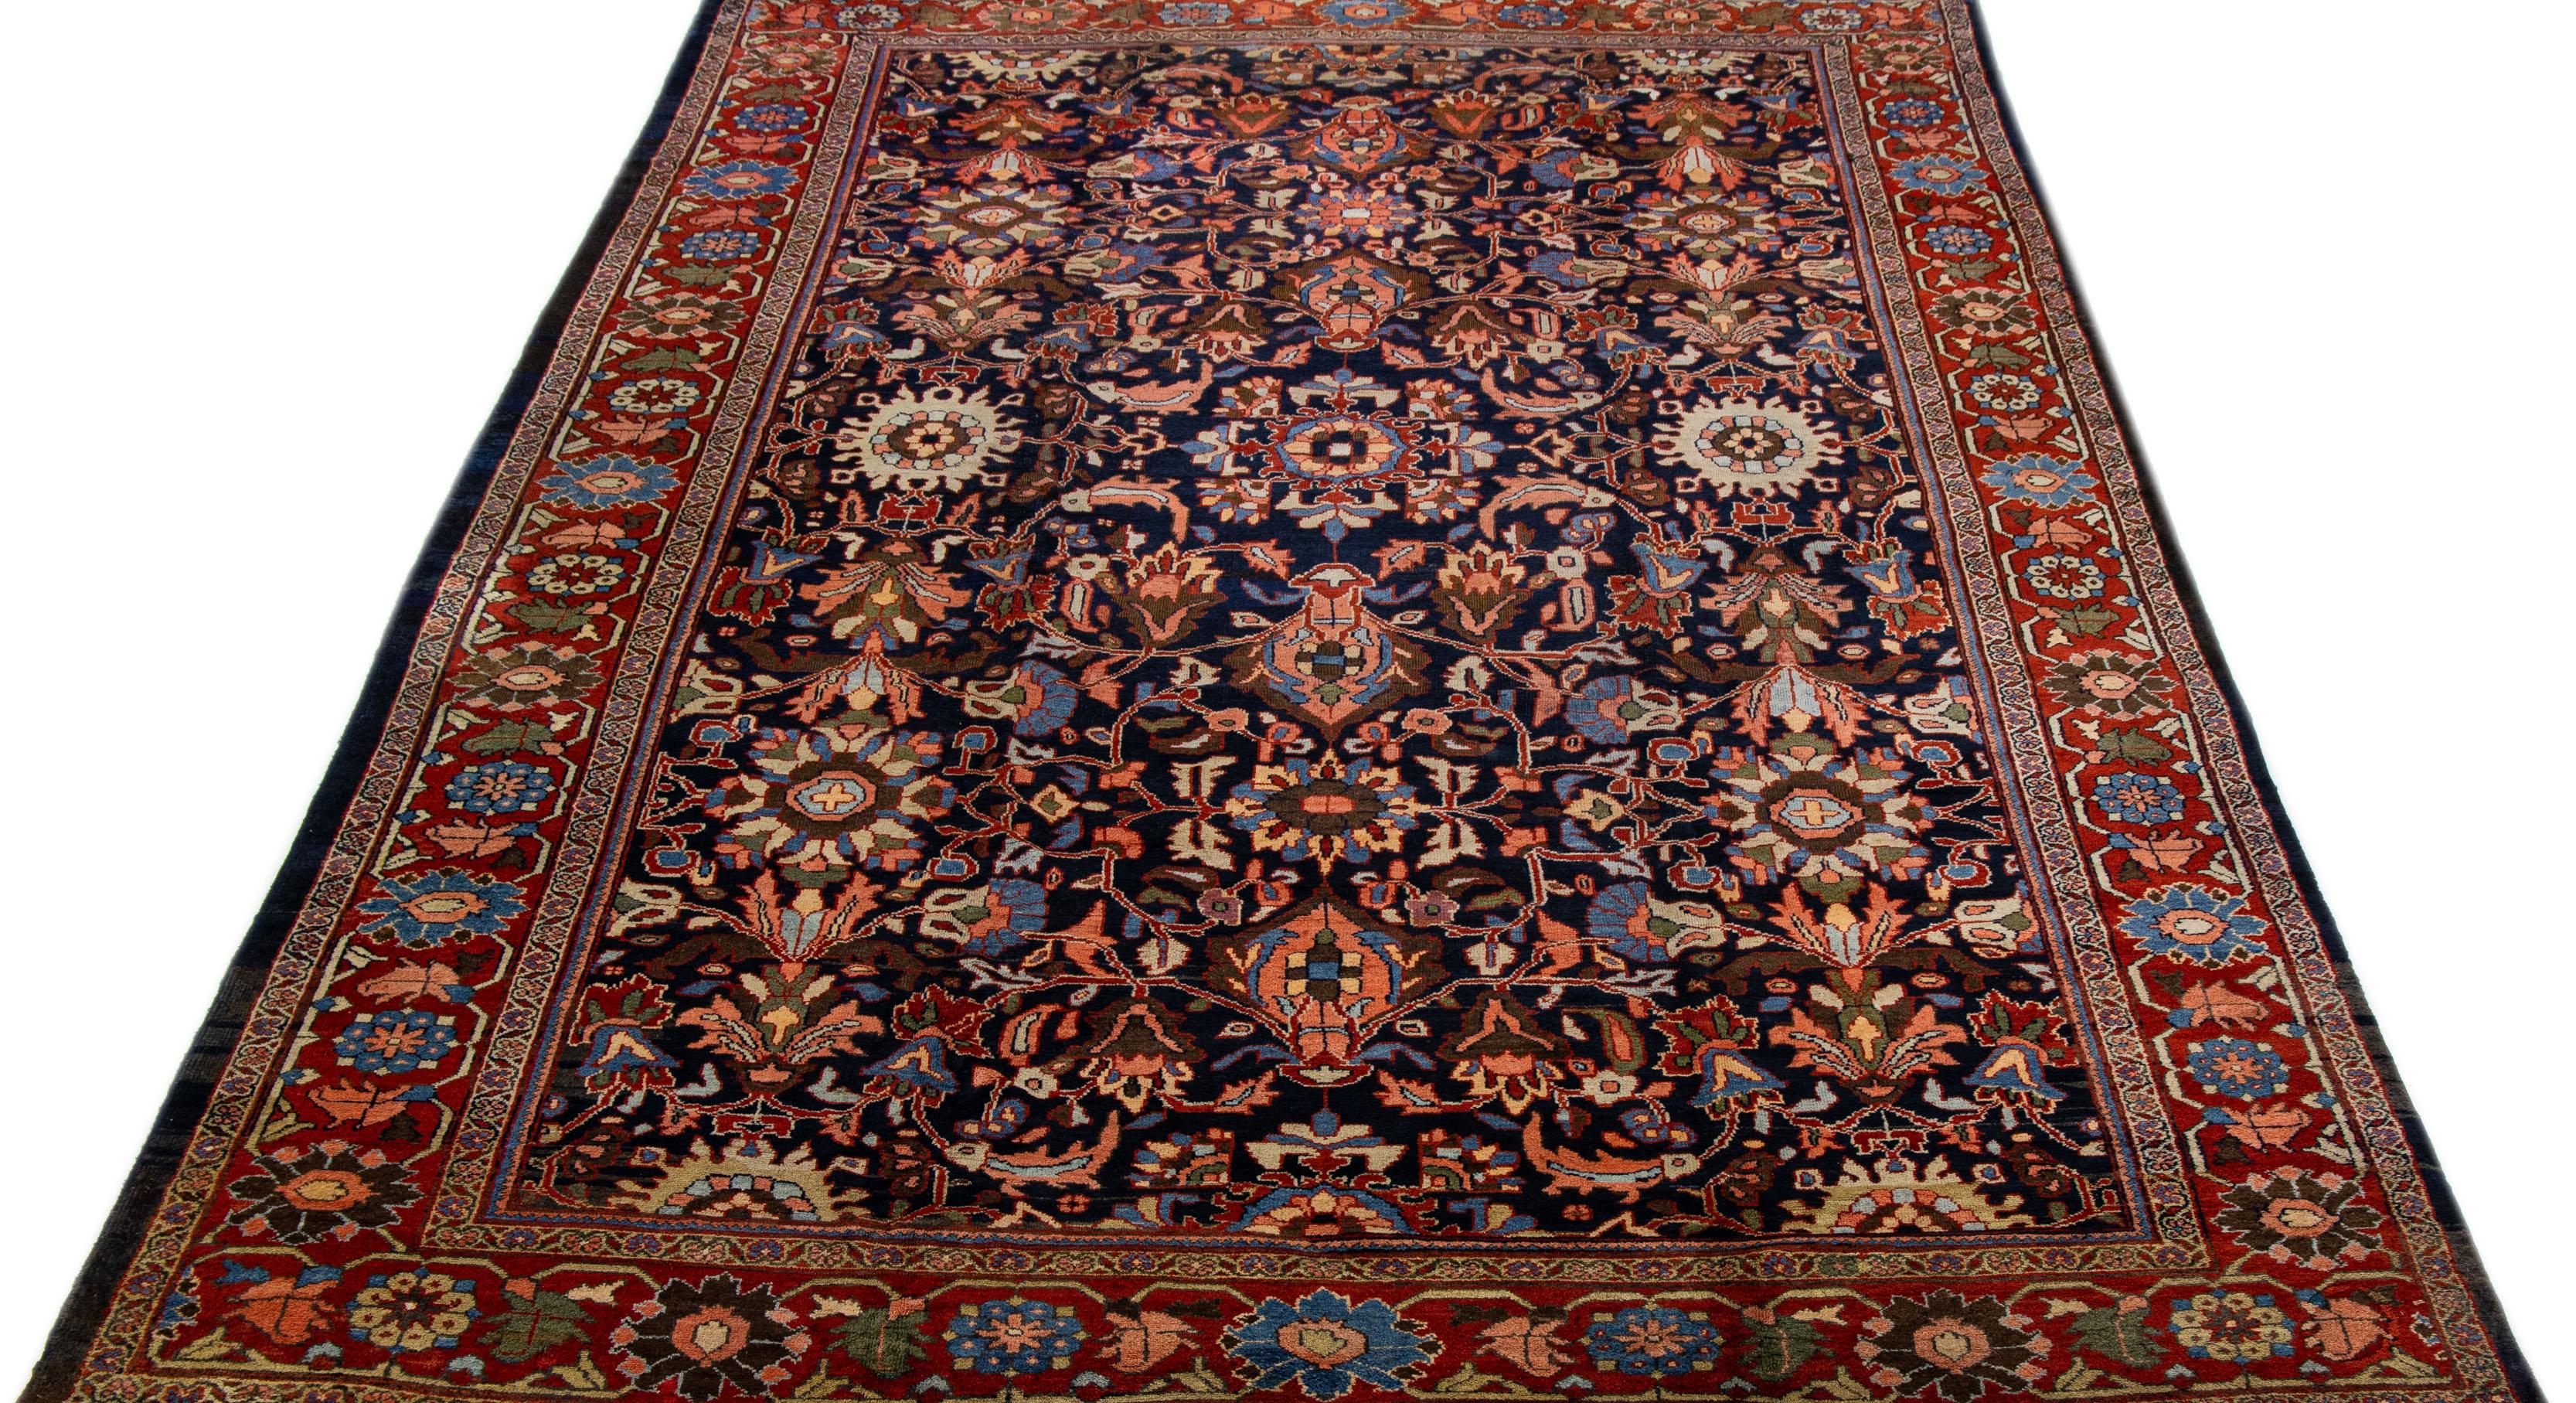 A stunning antique mahal wool rug, exquisitely hand knotted and endowed with a mesmerizing navy blue color field. This Persian masterpiece showcases a red designed frame that encases an all-over floral pattern, beautifully accentuated with